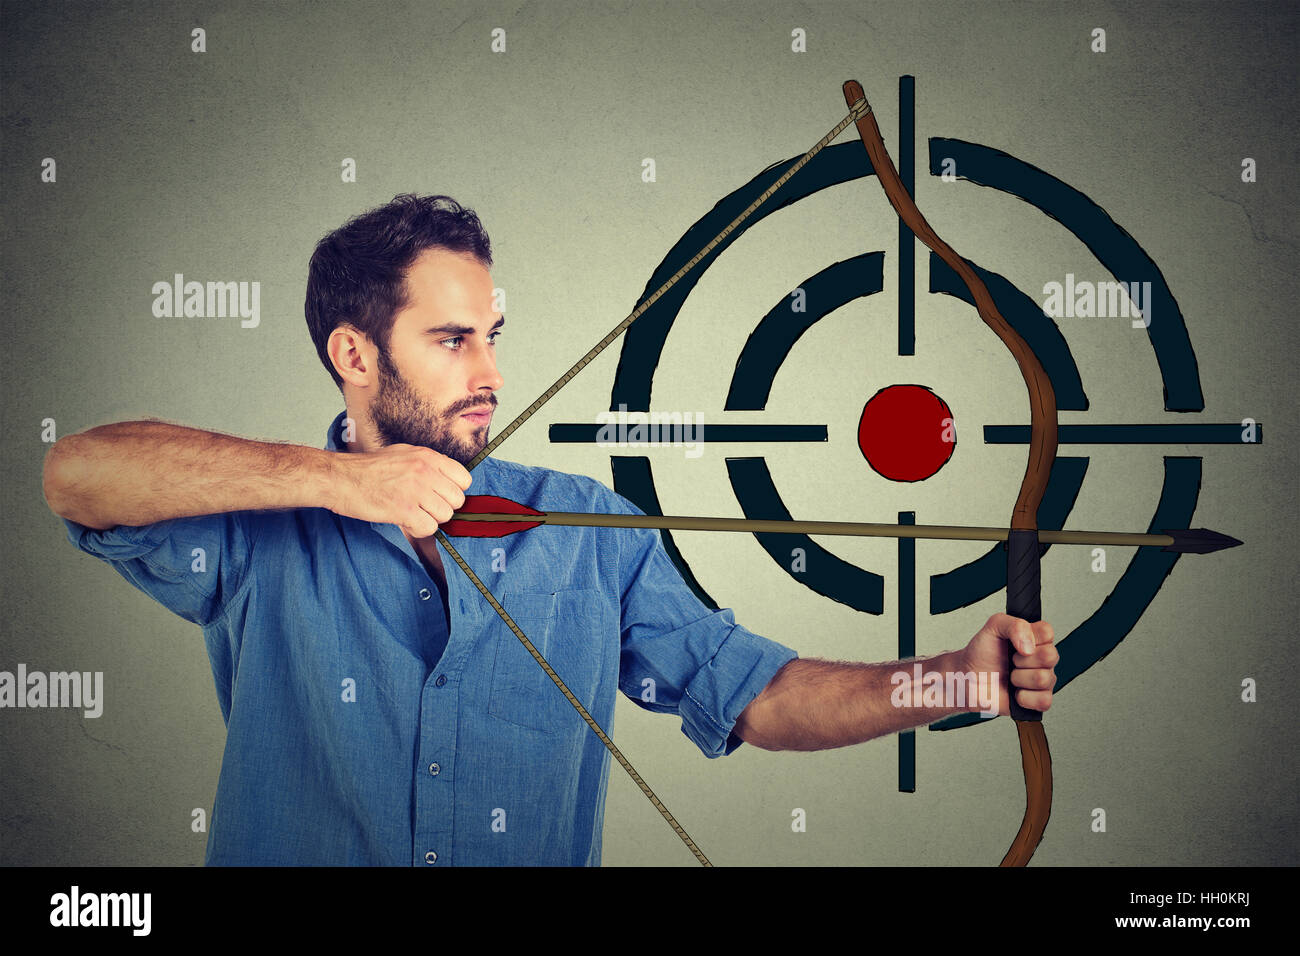 Side profile man trying to hit a target with bow and arrow Stock Photo